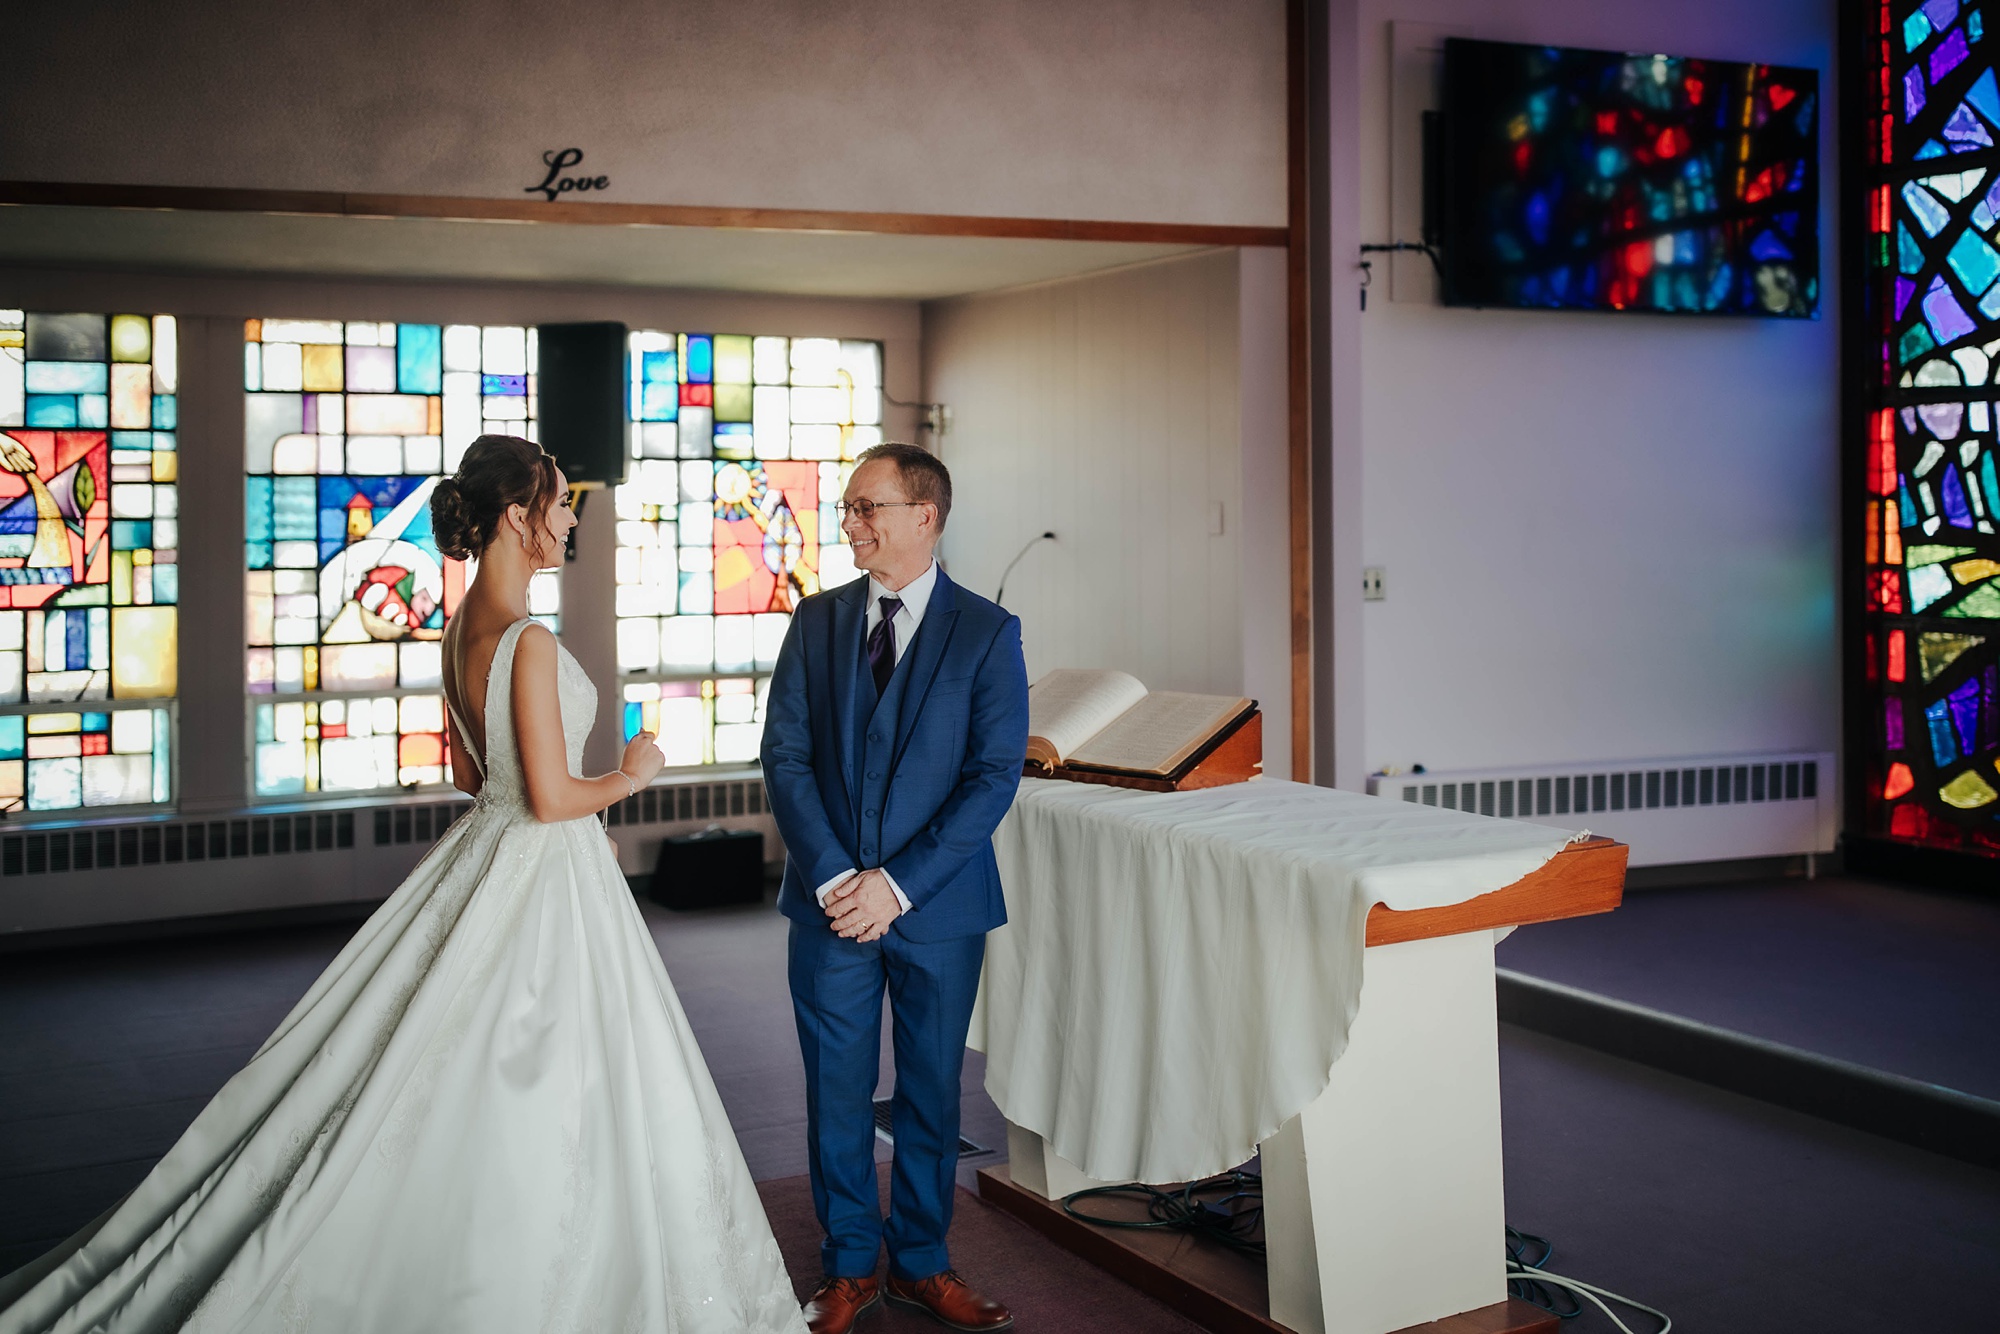 bride and father have first look in church by stained glass window